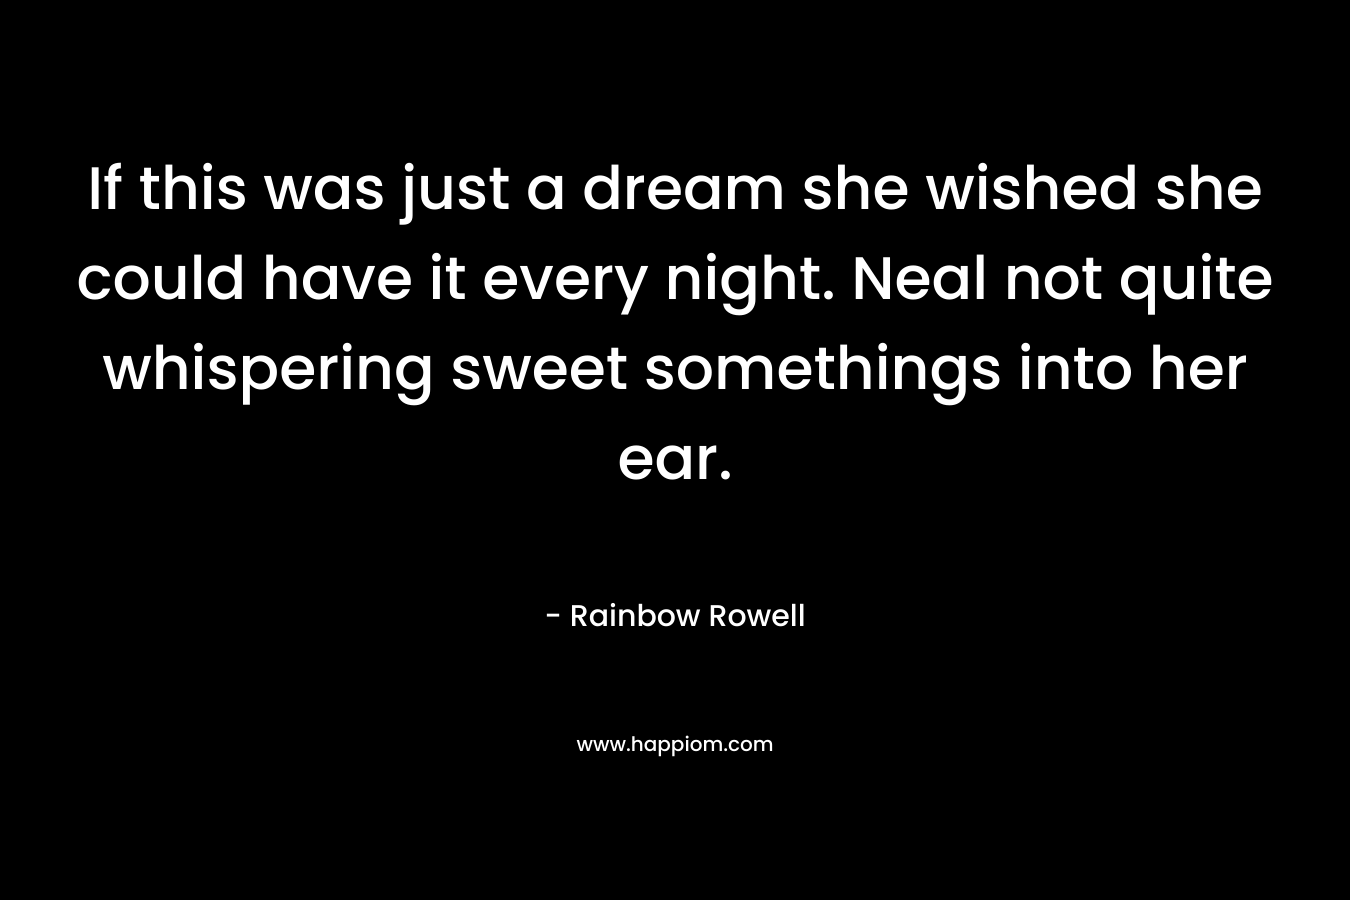 If this was just a dream she wished she could have it every night. Neal not quite whispering sweet somethings into her ear.